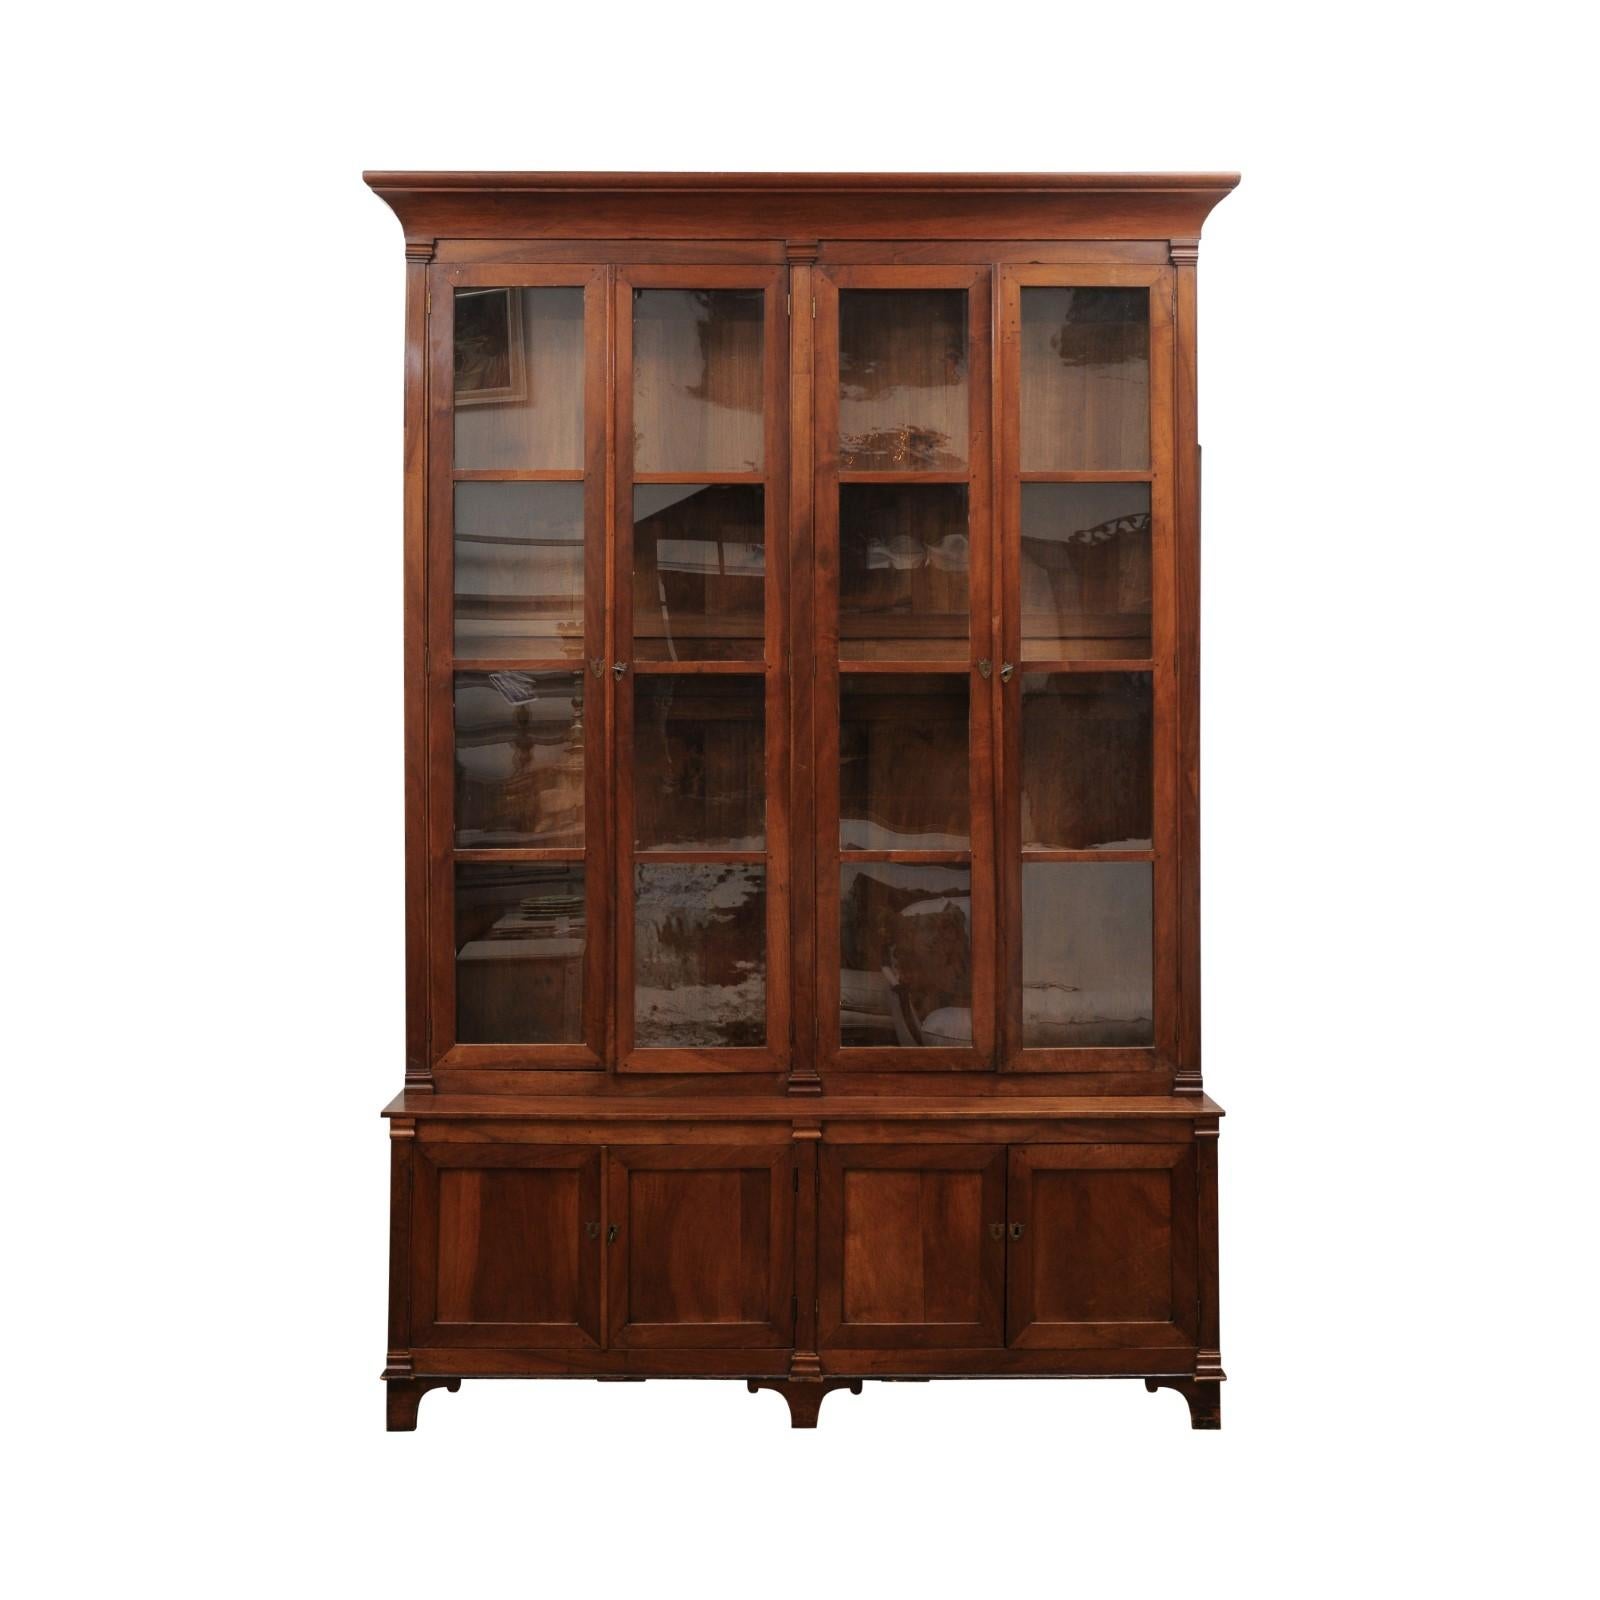 A large French Louis XVI style wooden bookcase from the late 19th century, with two pairs of glass doors, two pairs of wooden doors and Doric pilasters. Created in France during the last quarter of the 19th century, this Louis XVI inspired bookcase